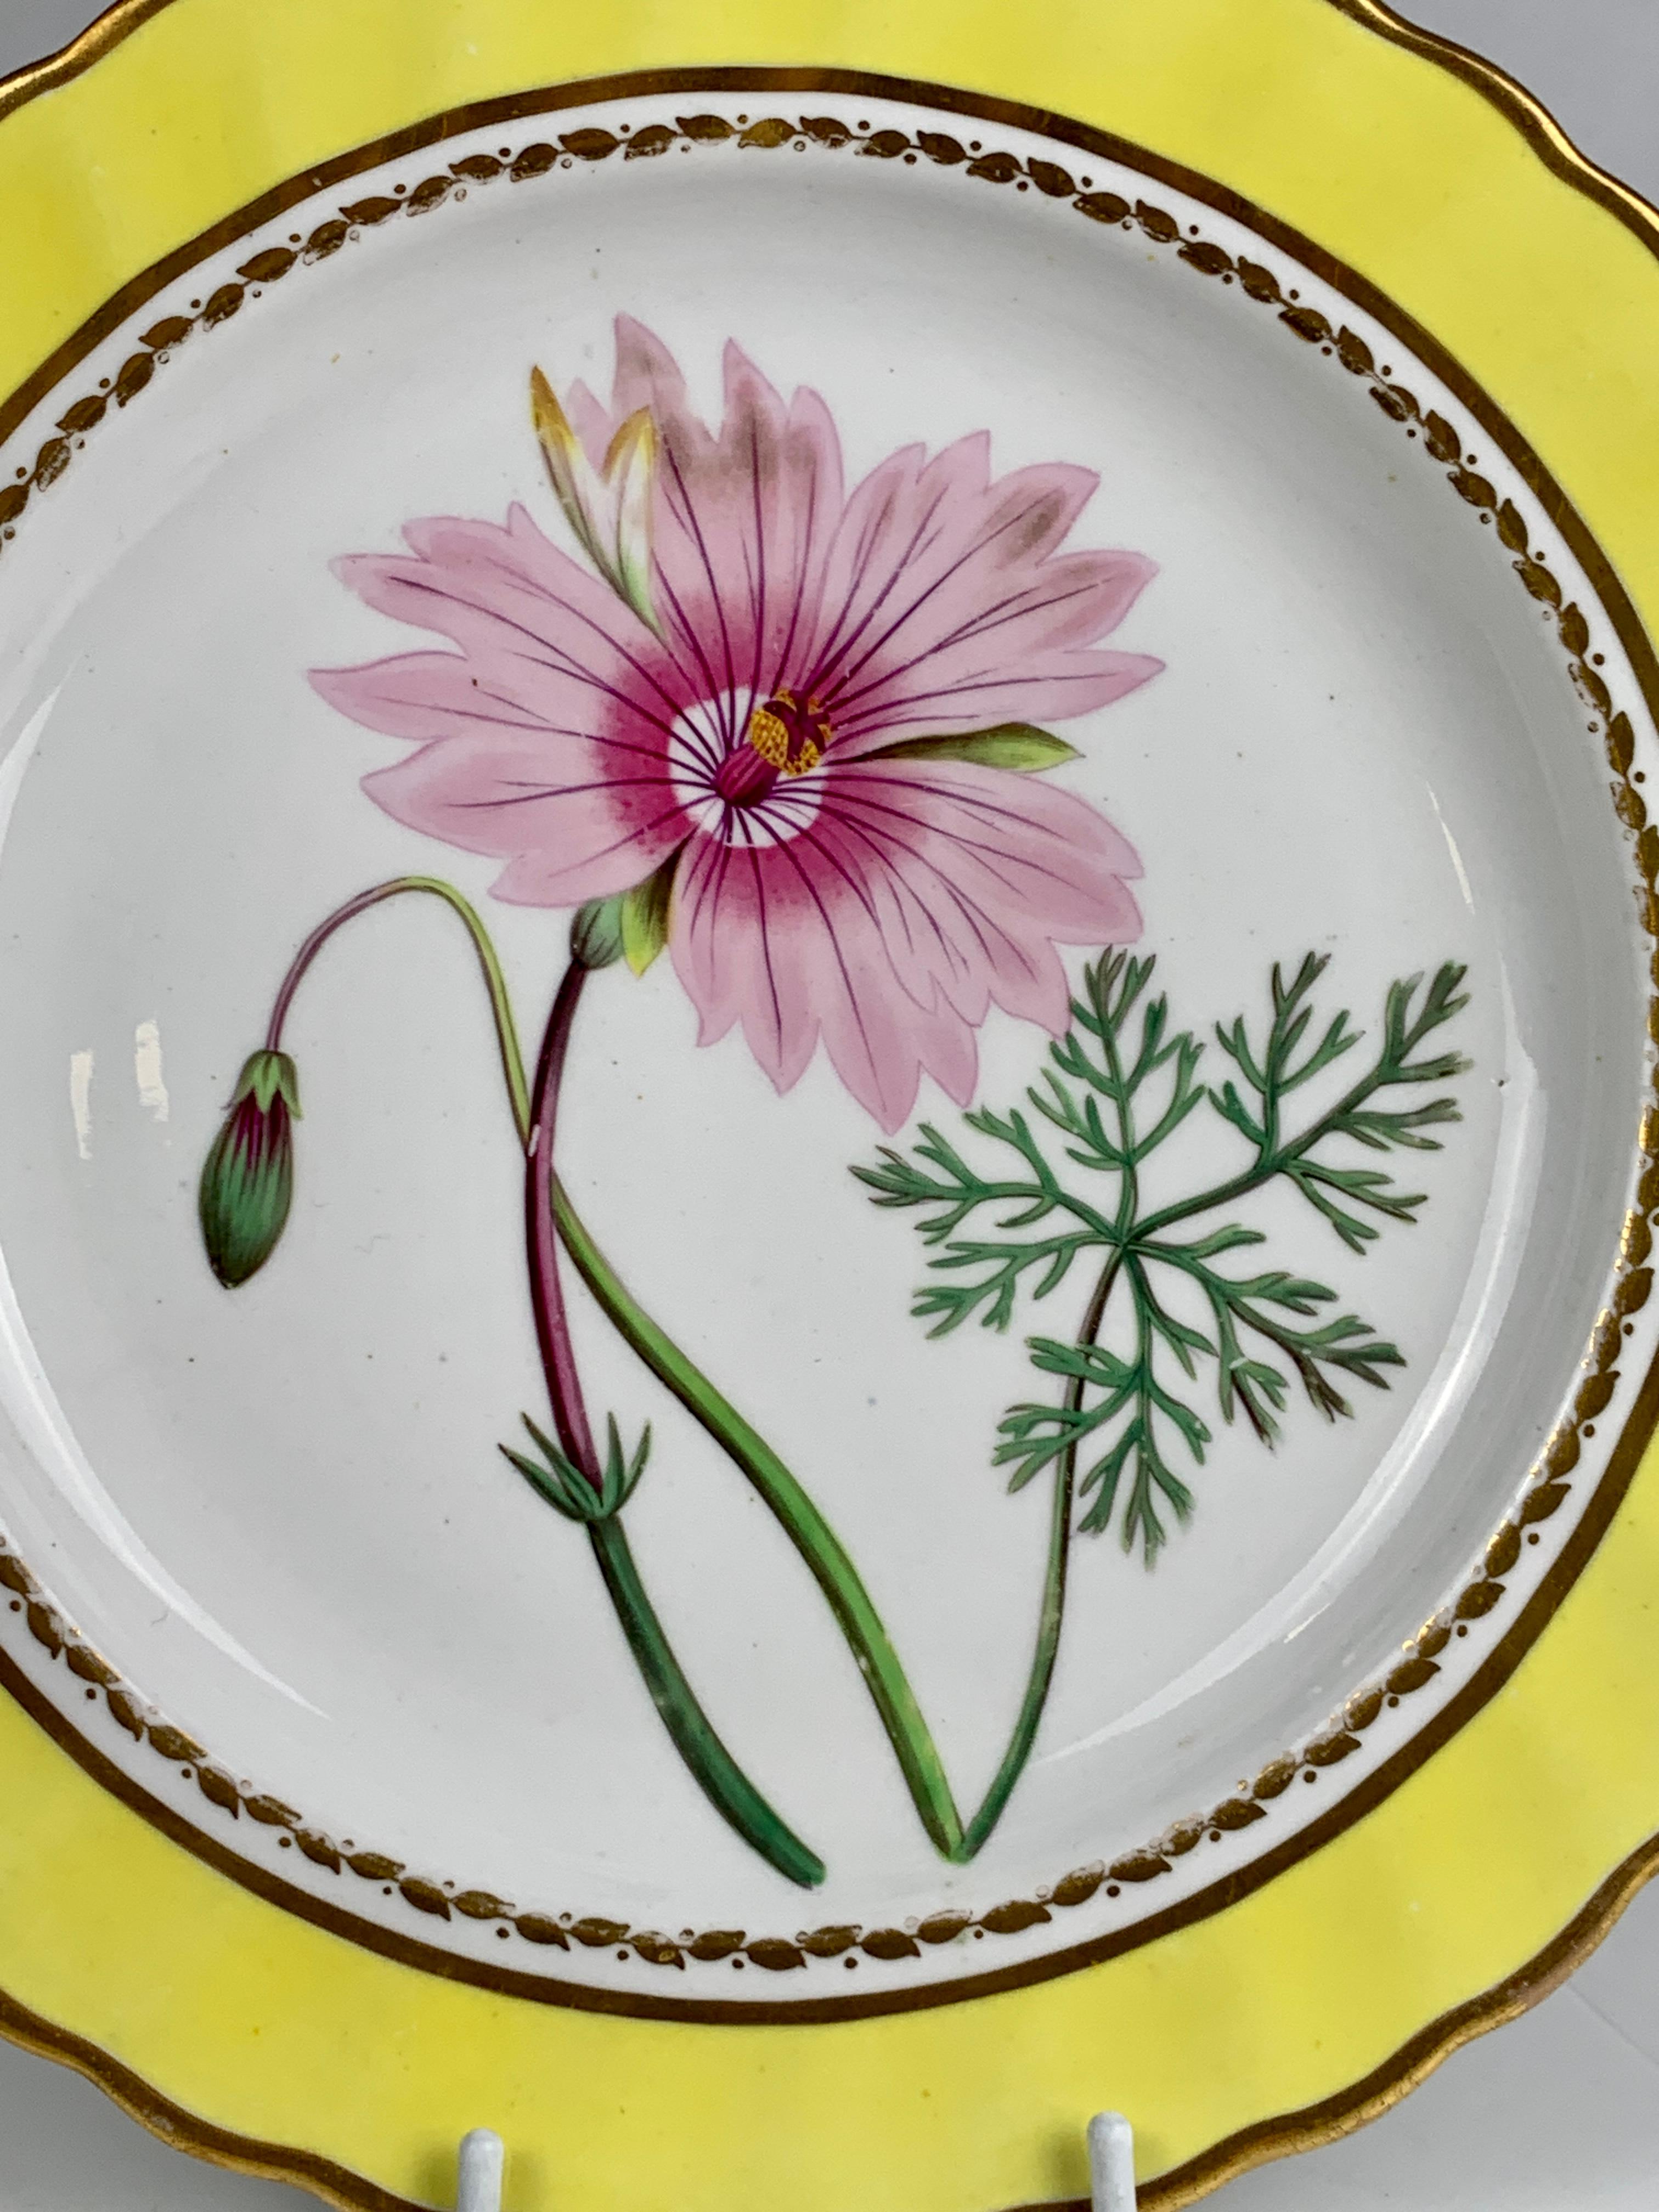 Hand painted at Spode circa 1820, this botanical dish is a beauty!
The painting is both flamboyant and natural.
We see a gorgeous pink flower with a single bud and green leaves. 
The bright yellow of the border combines beautifully with the two